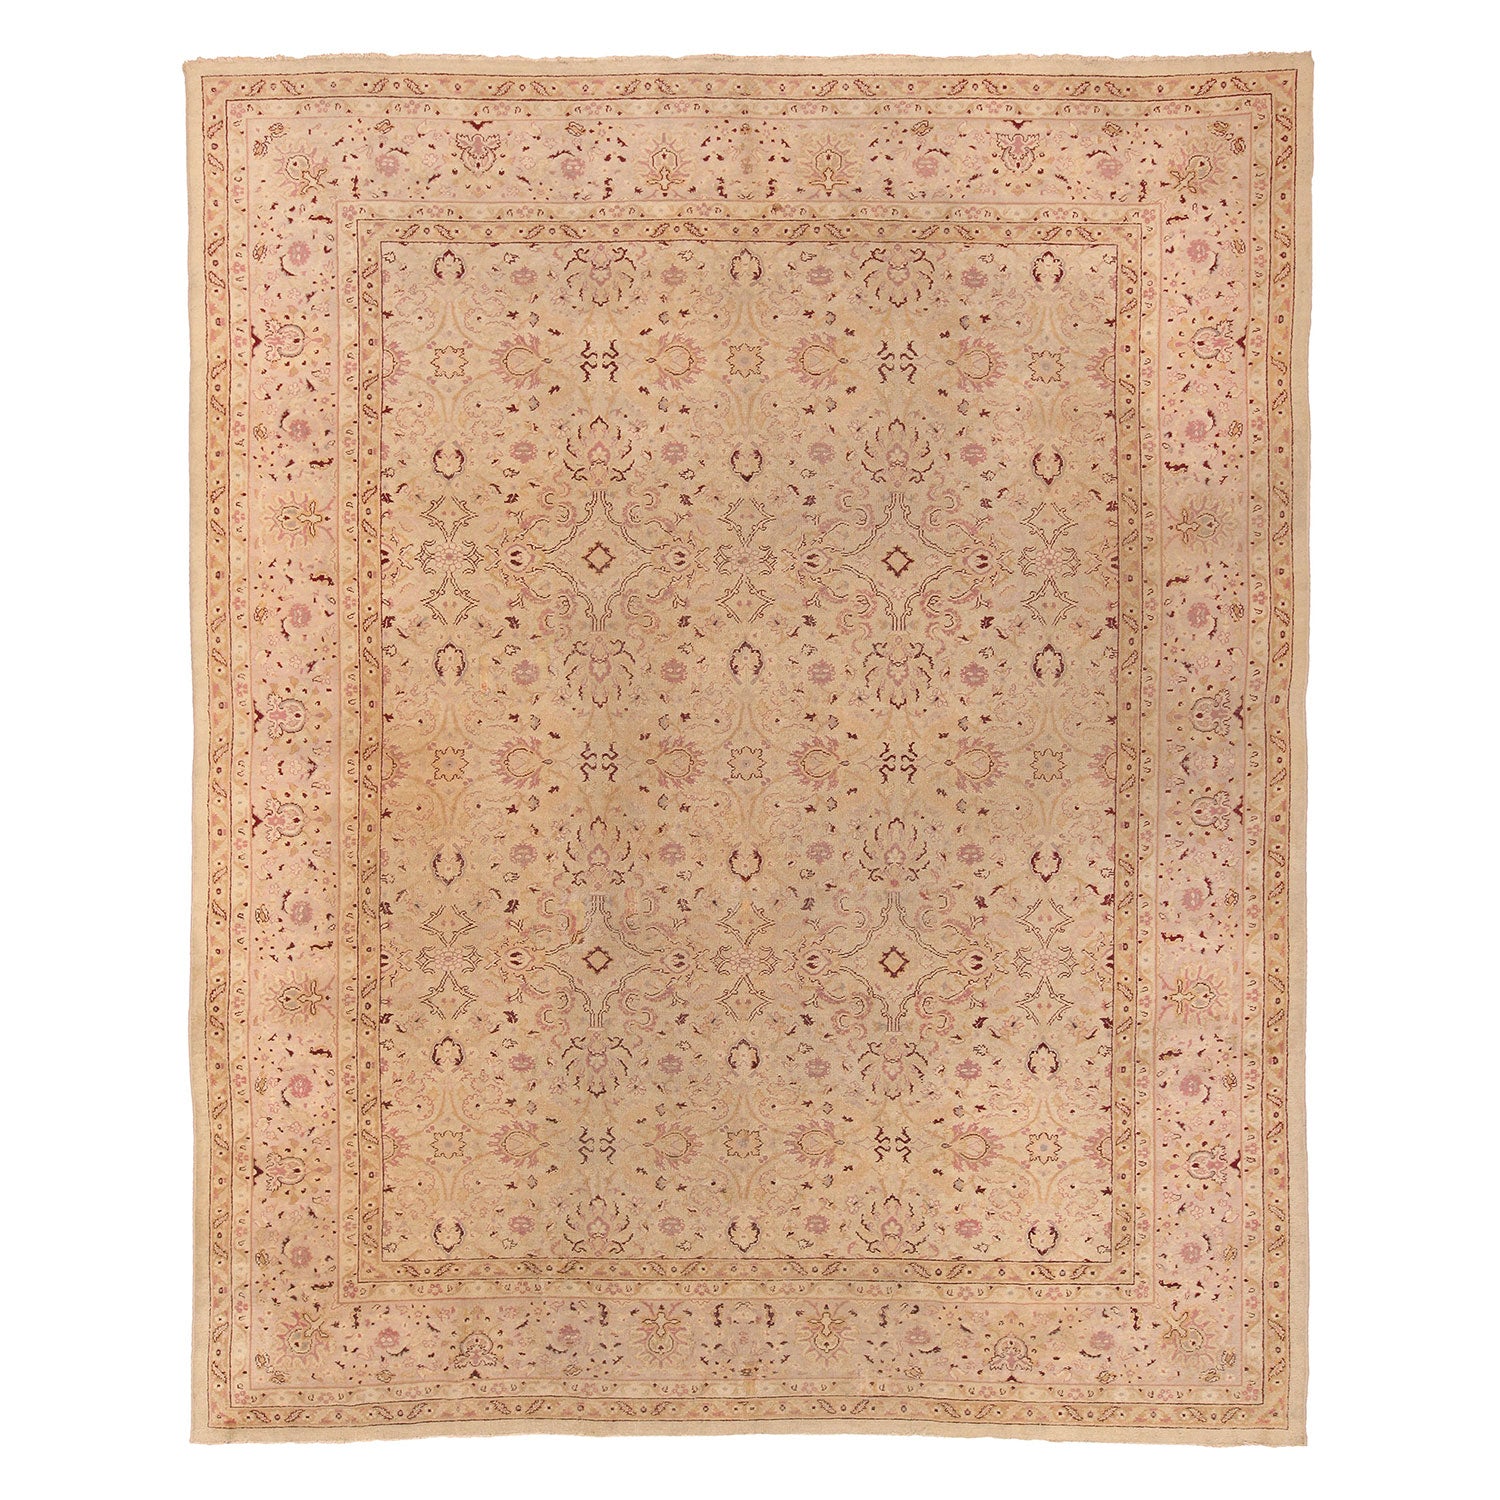 Ornate, handwoven carpet showcases intricate floral and geometric designs.